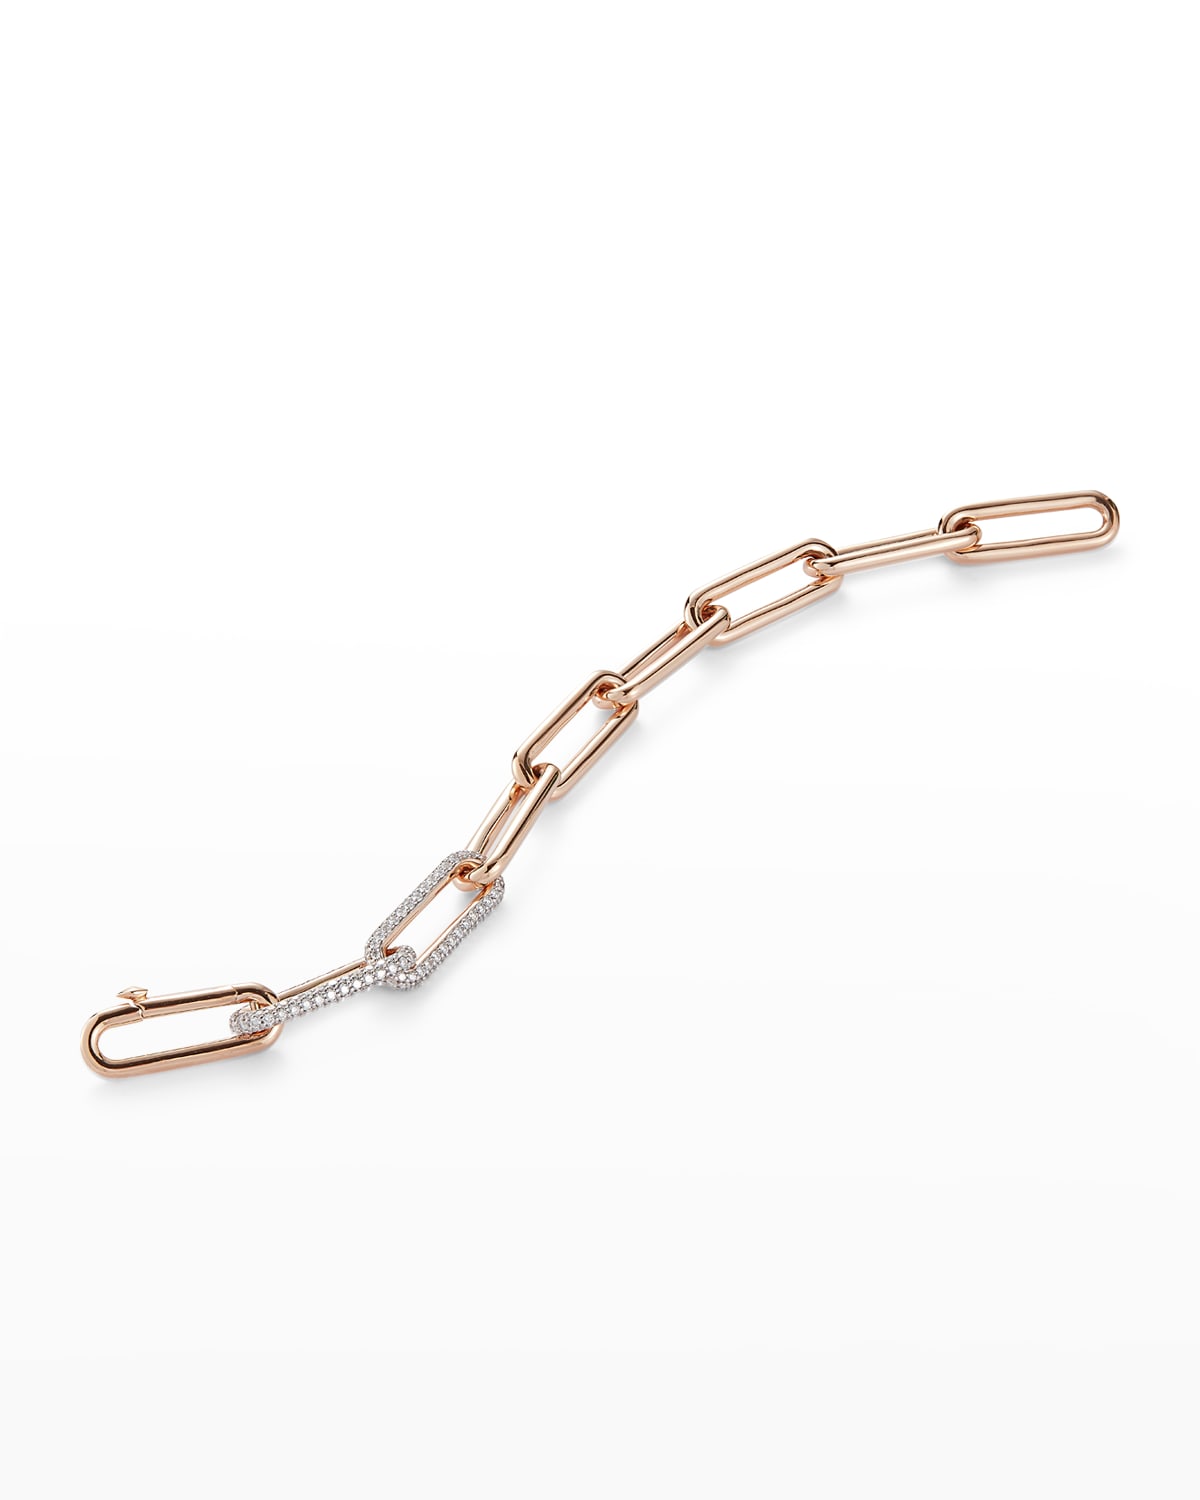 WALTERS FAITH 18K ROSE GOLD ELONGATED CHAIN LINK BRACELET WITH 2 WHITE DIAMOND LINKS